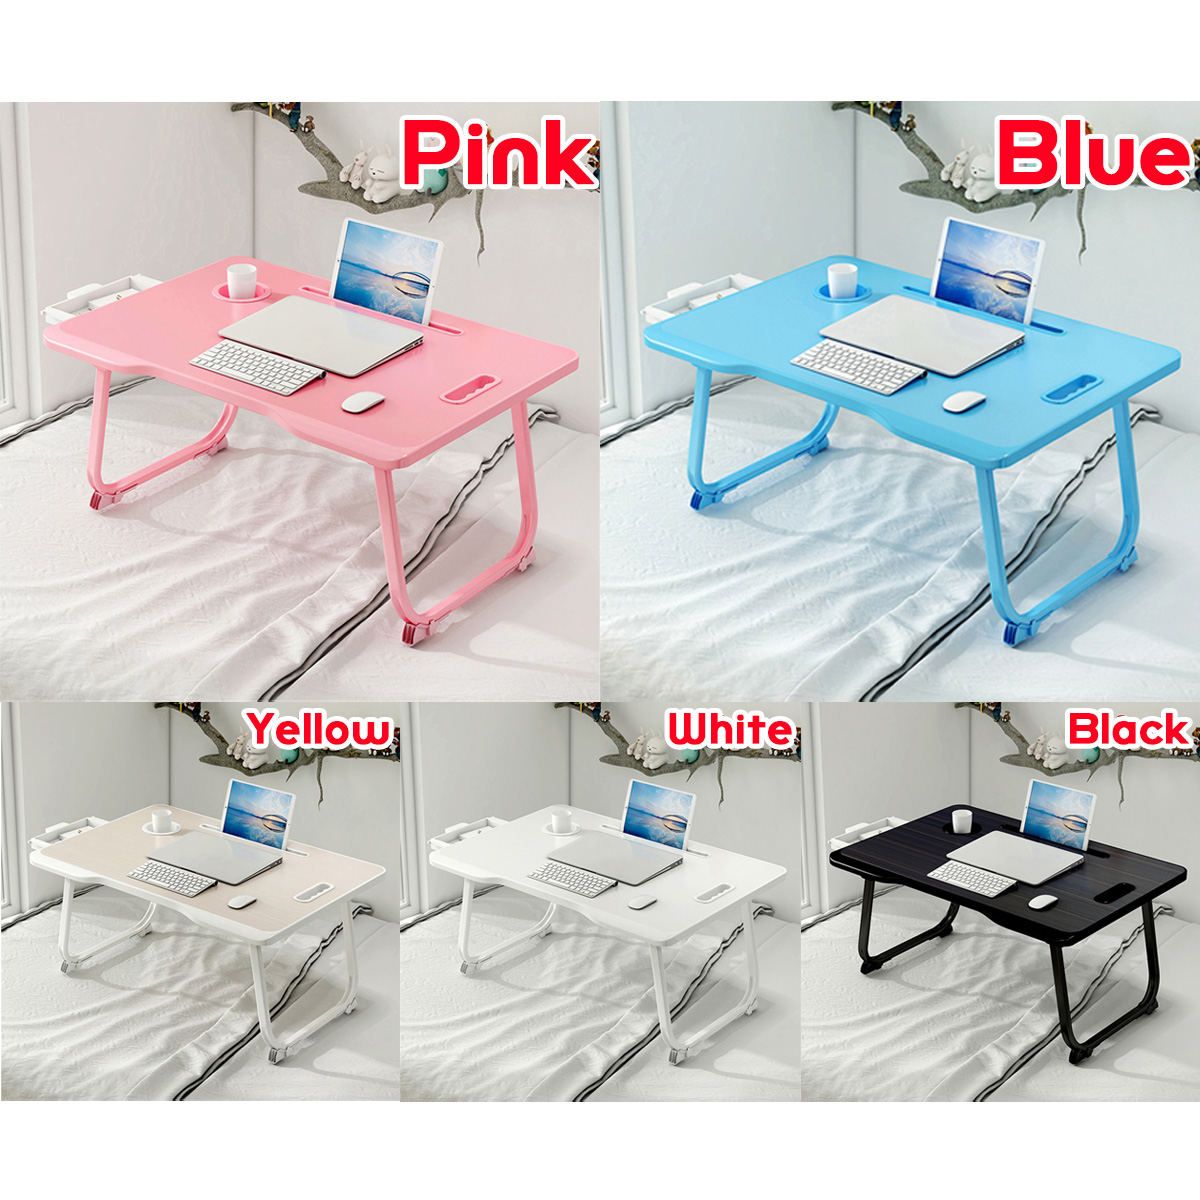 Folding-Laptop-Table-Desk-Notebook-Learning-Writing-Desk-with-Small-Drawer-Cup-Slot-Lap-Desk-Bed-for-1761880-4